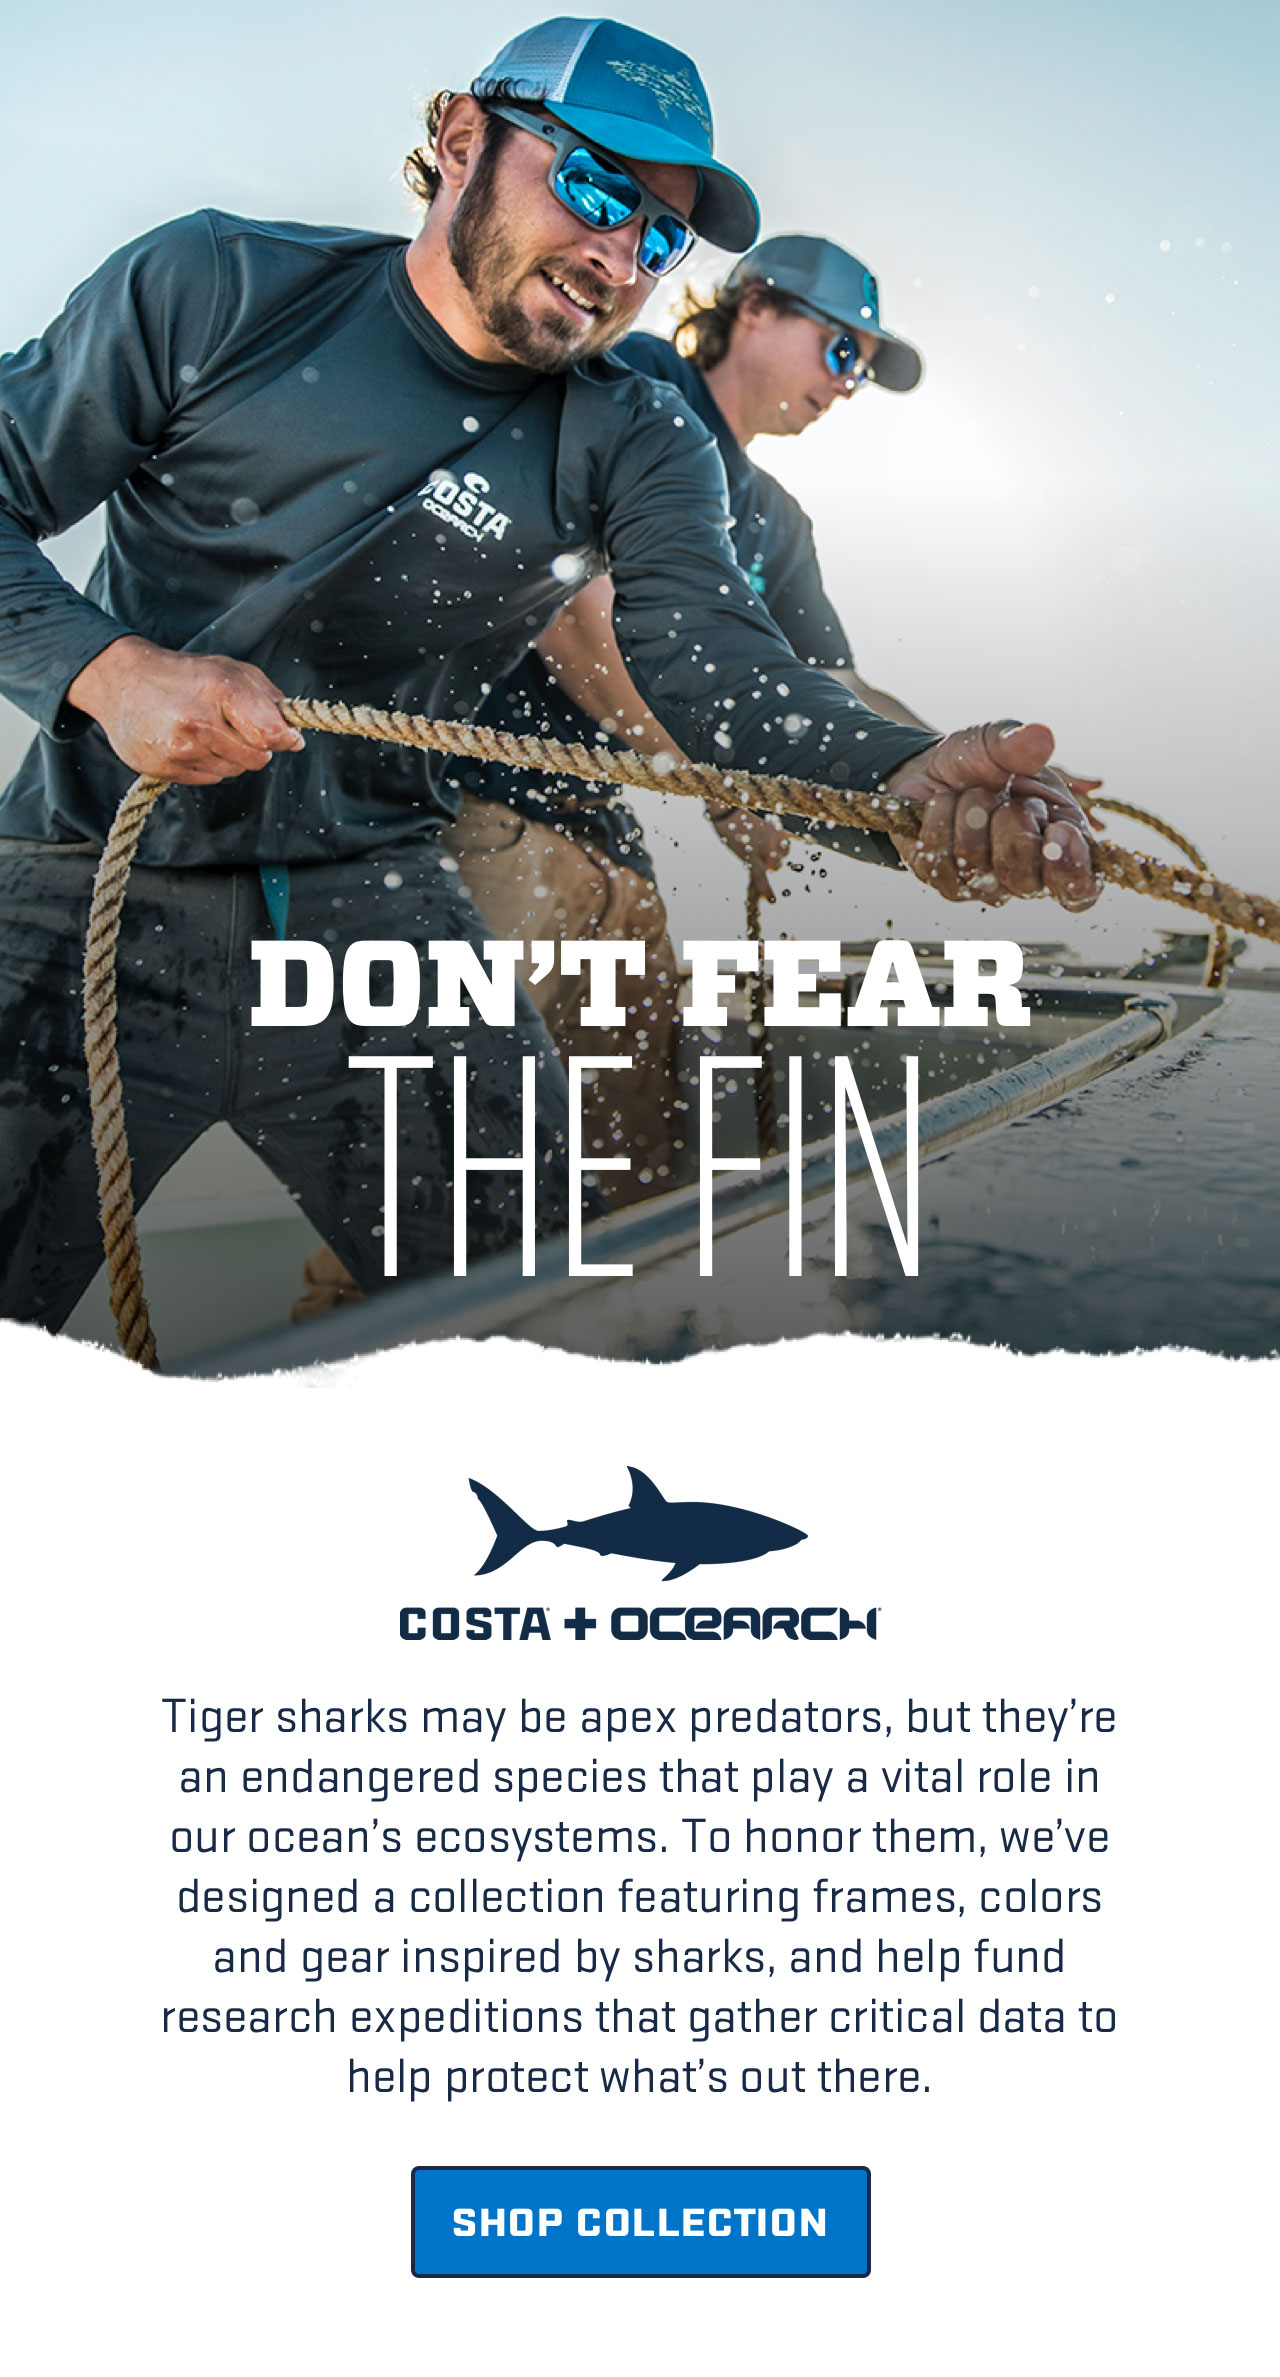 

DON''T FEAR
THE FIN

Costa + Ocearch

Tiger sharks may be apex predators, but they're an endangered species that play a vital role in our ocean's ecosystems. To honor them, we've designed a collection featuring frames, colors and gear inspired by sharks, and help fund research expeditions that gather critical data to help protect what's out there.

[ SHOP COLLECTION ]

									